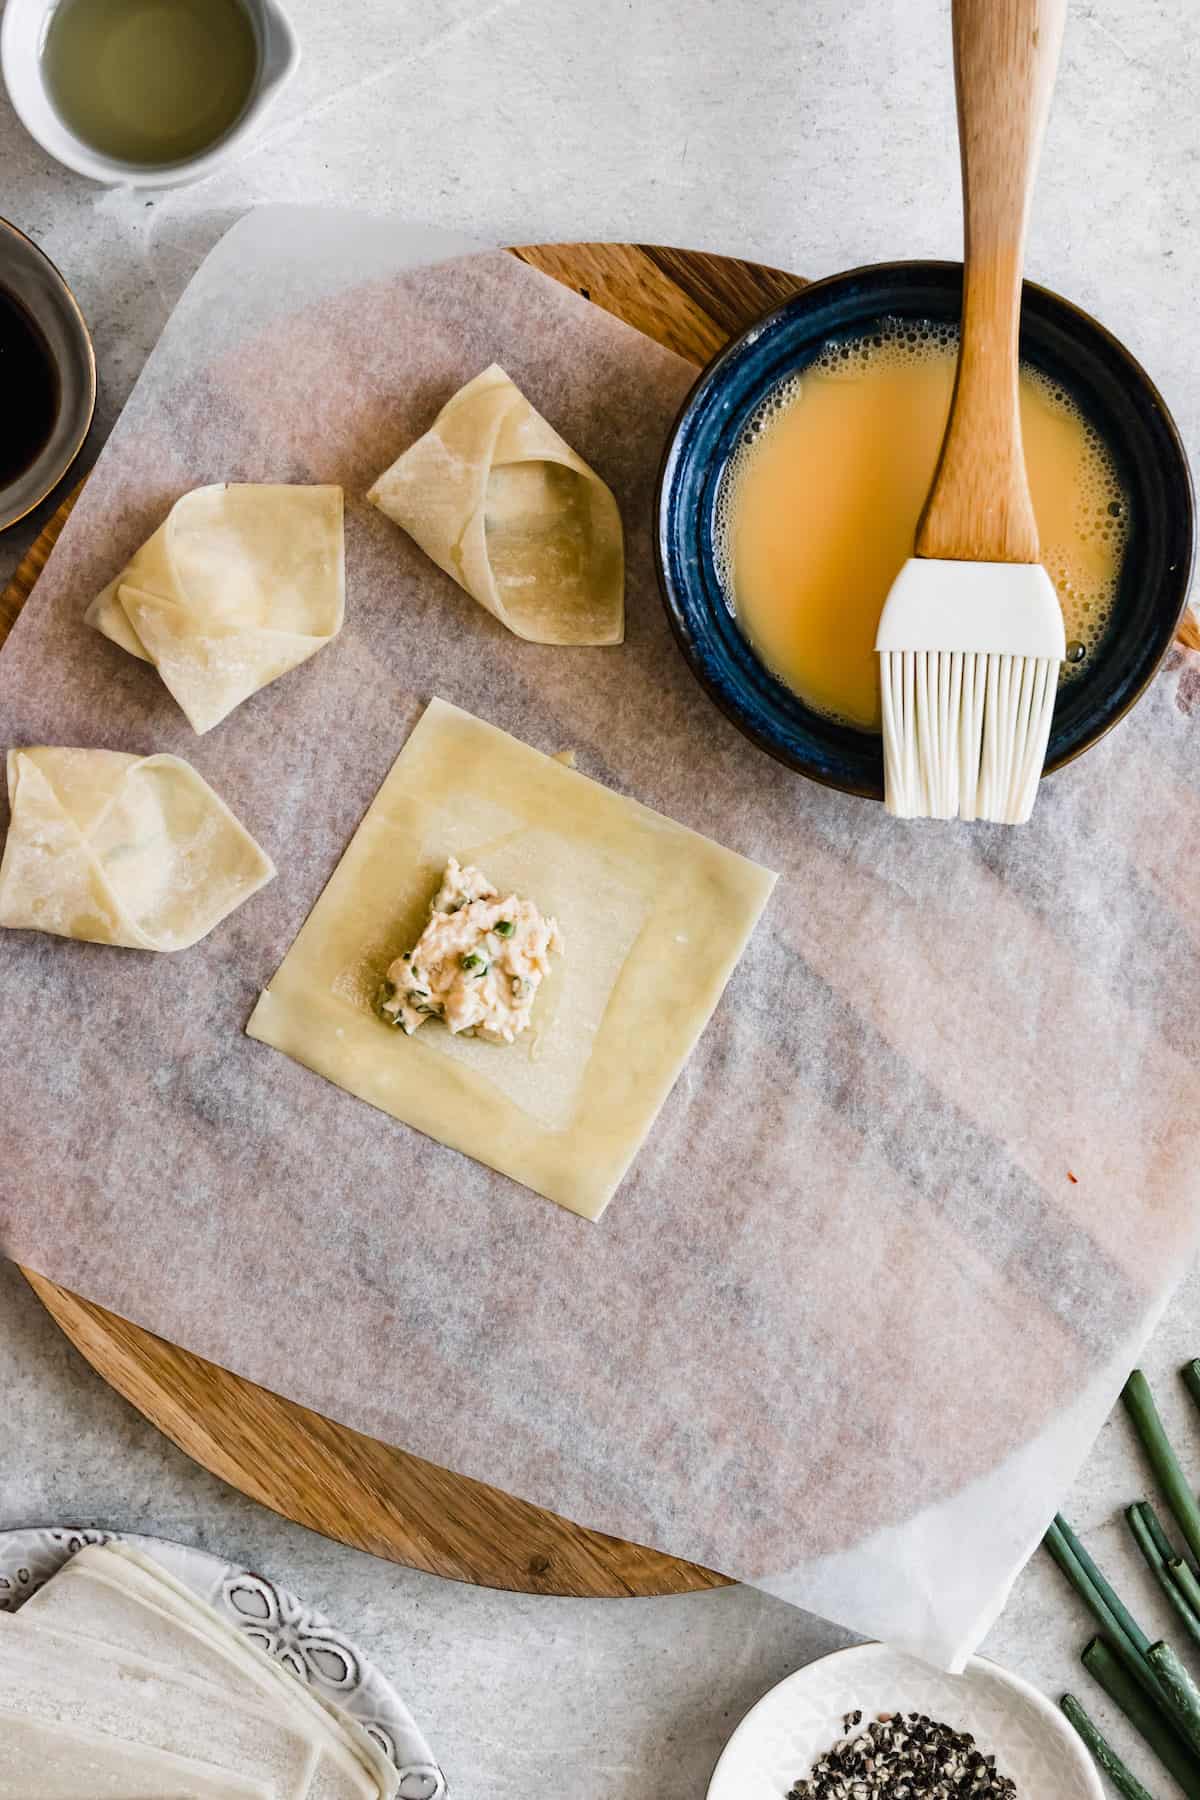 A wonton wrapper with crab rangoon filling.